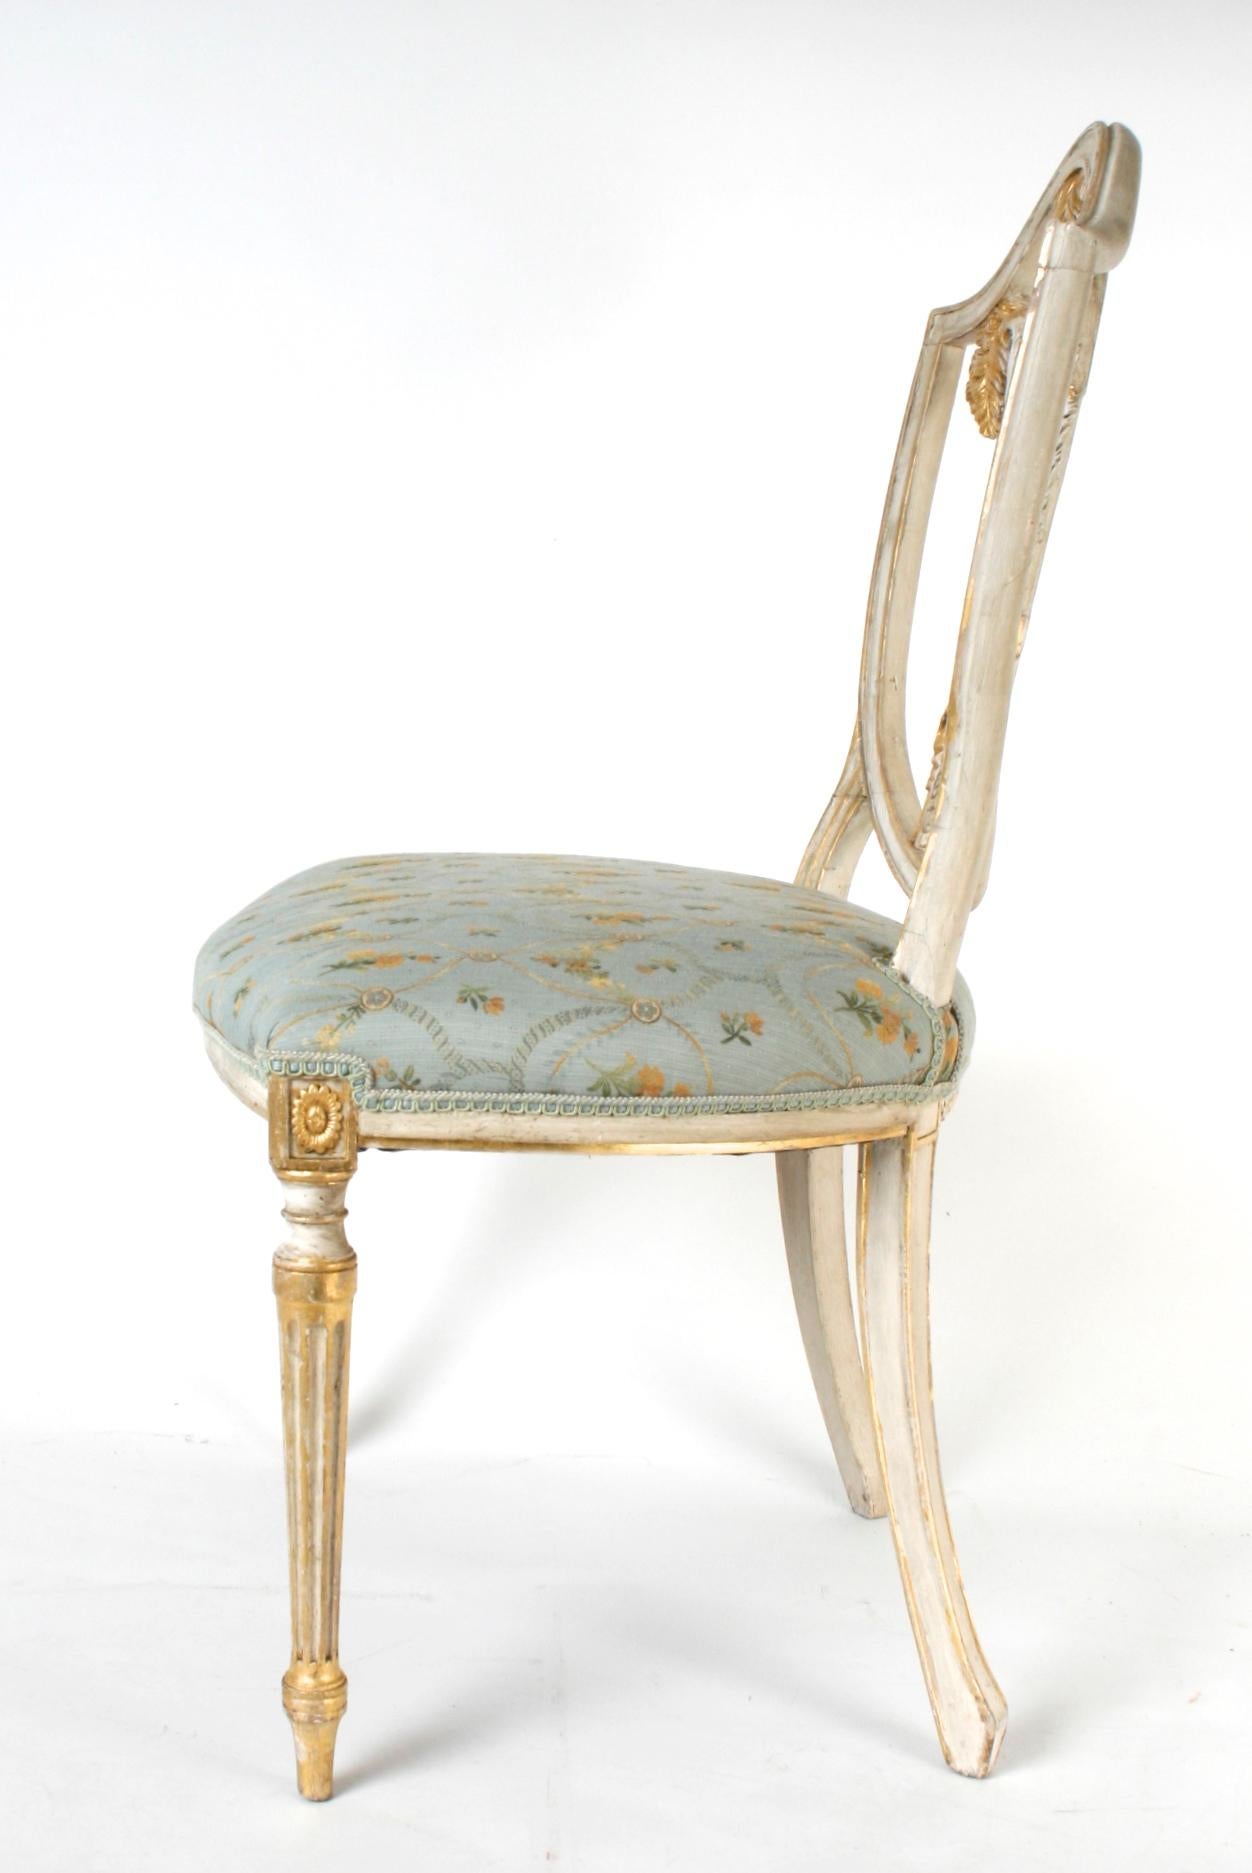 18th Century George III Parcel Gilt Shield Back Side Chairs with Plumes, circa 1775